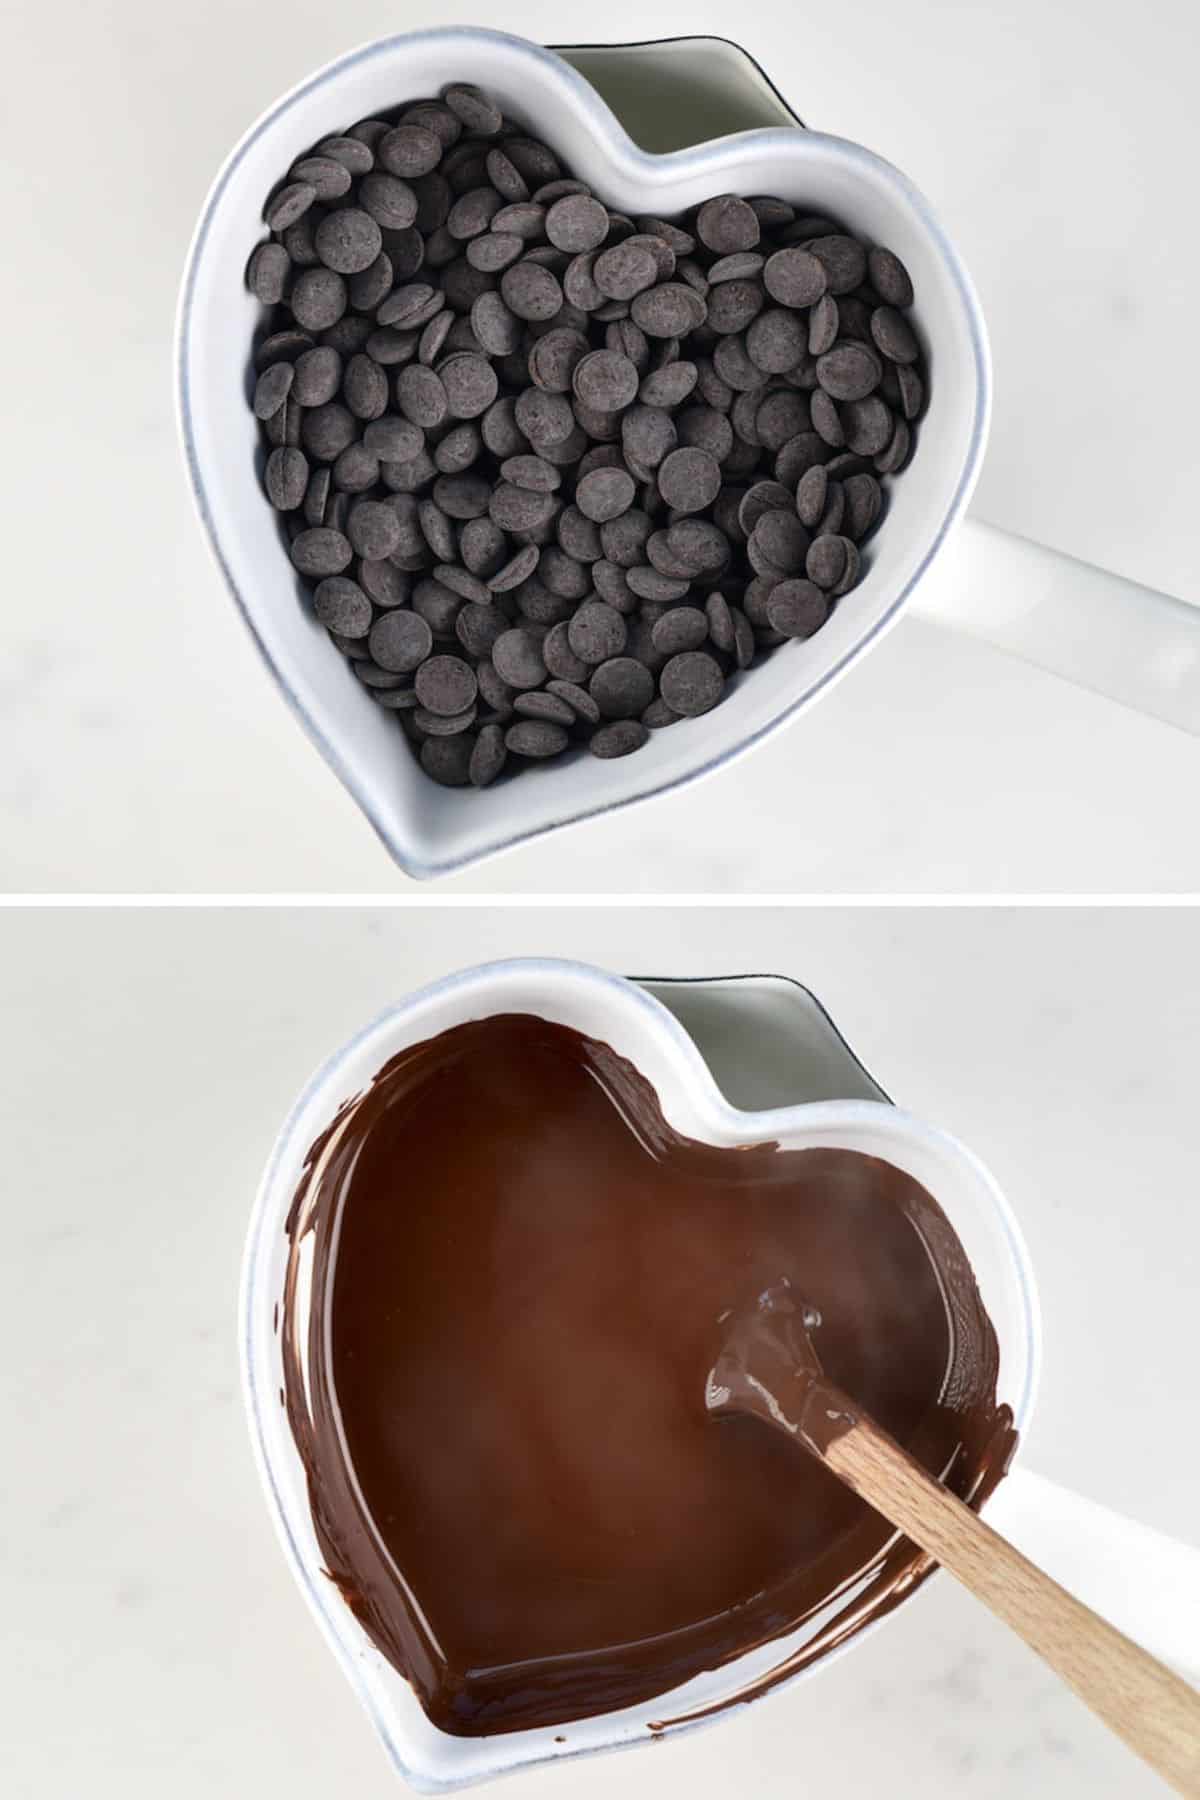 Steps for melting chocolate